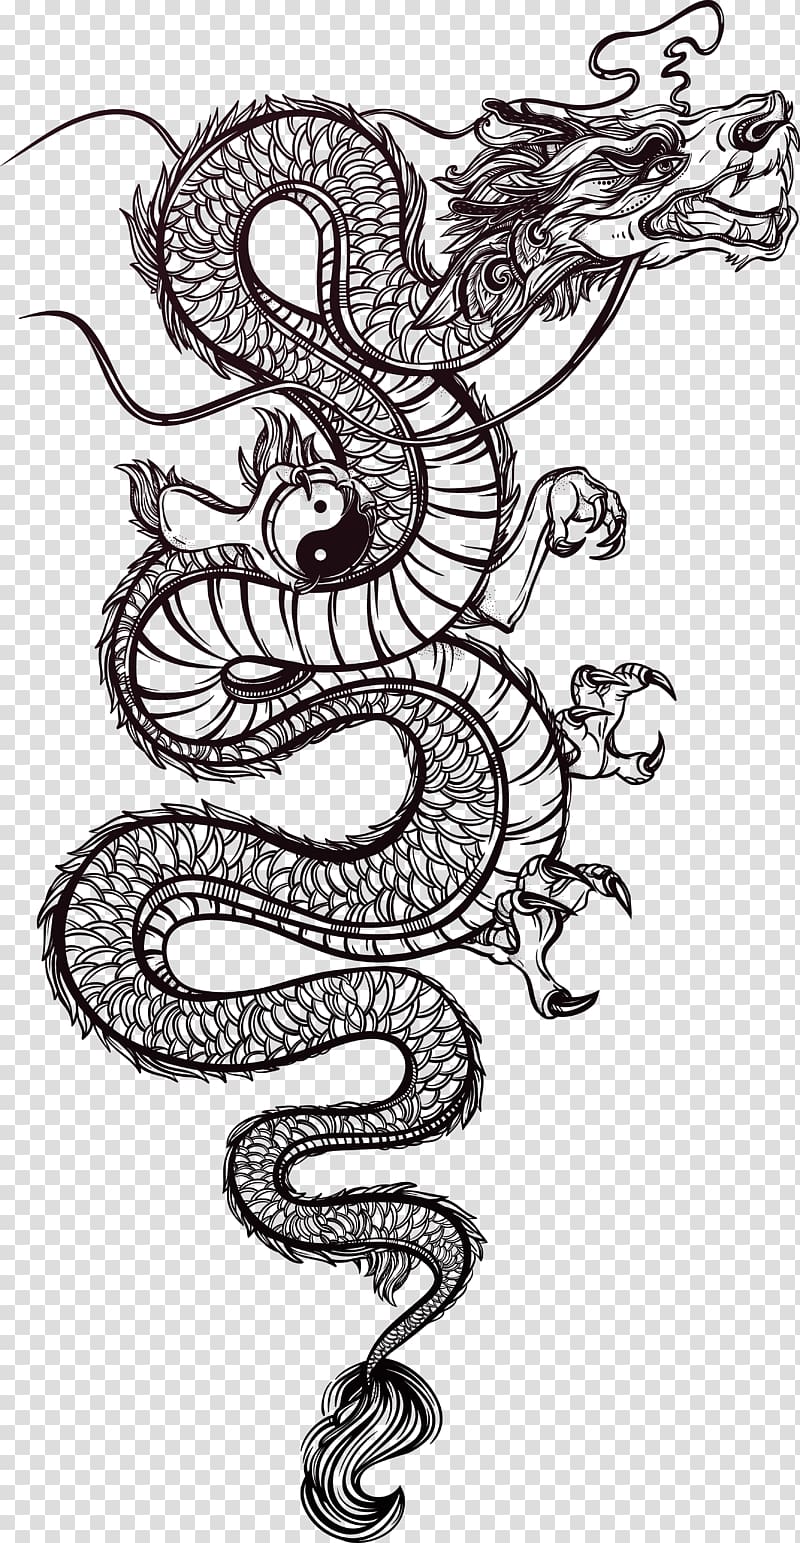 Asian dragon black and white tattoo Chinese or east asian dragon with  water waves black and white tattoo vector  CanStock